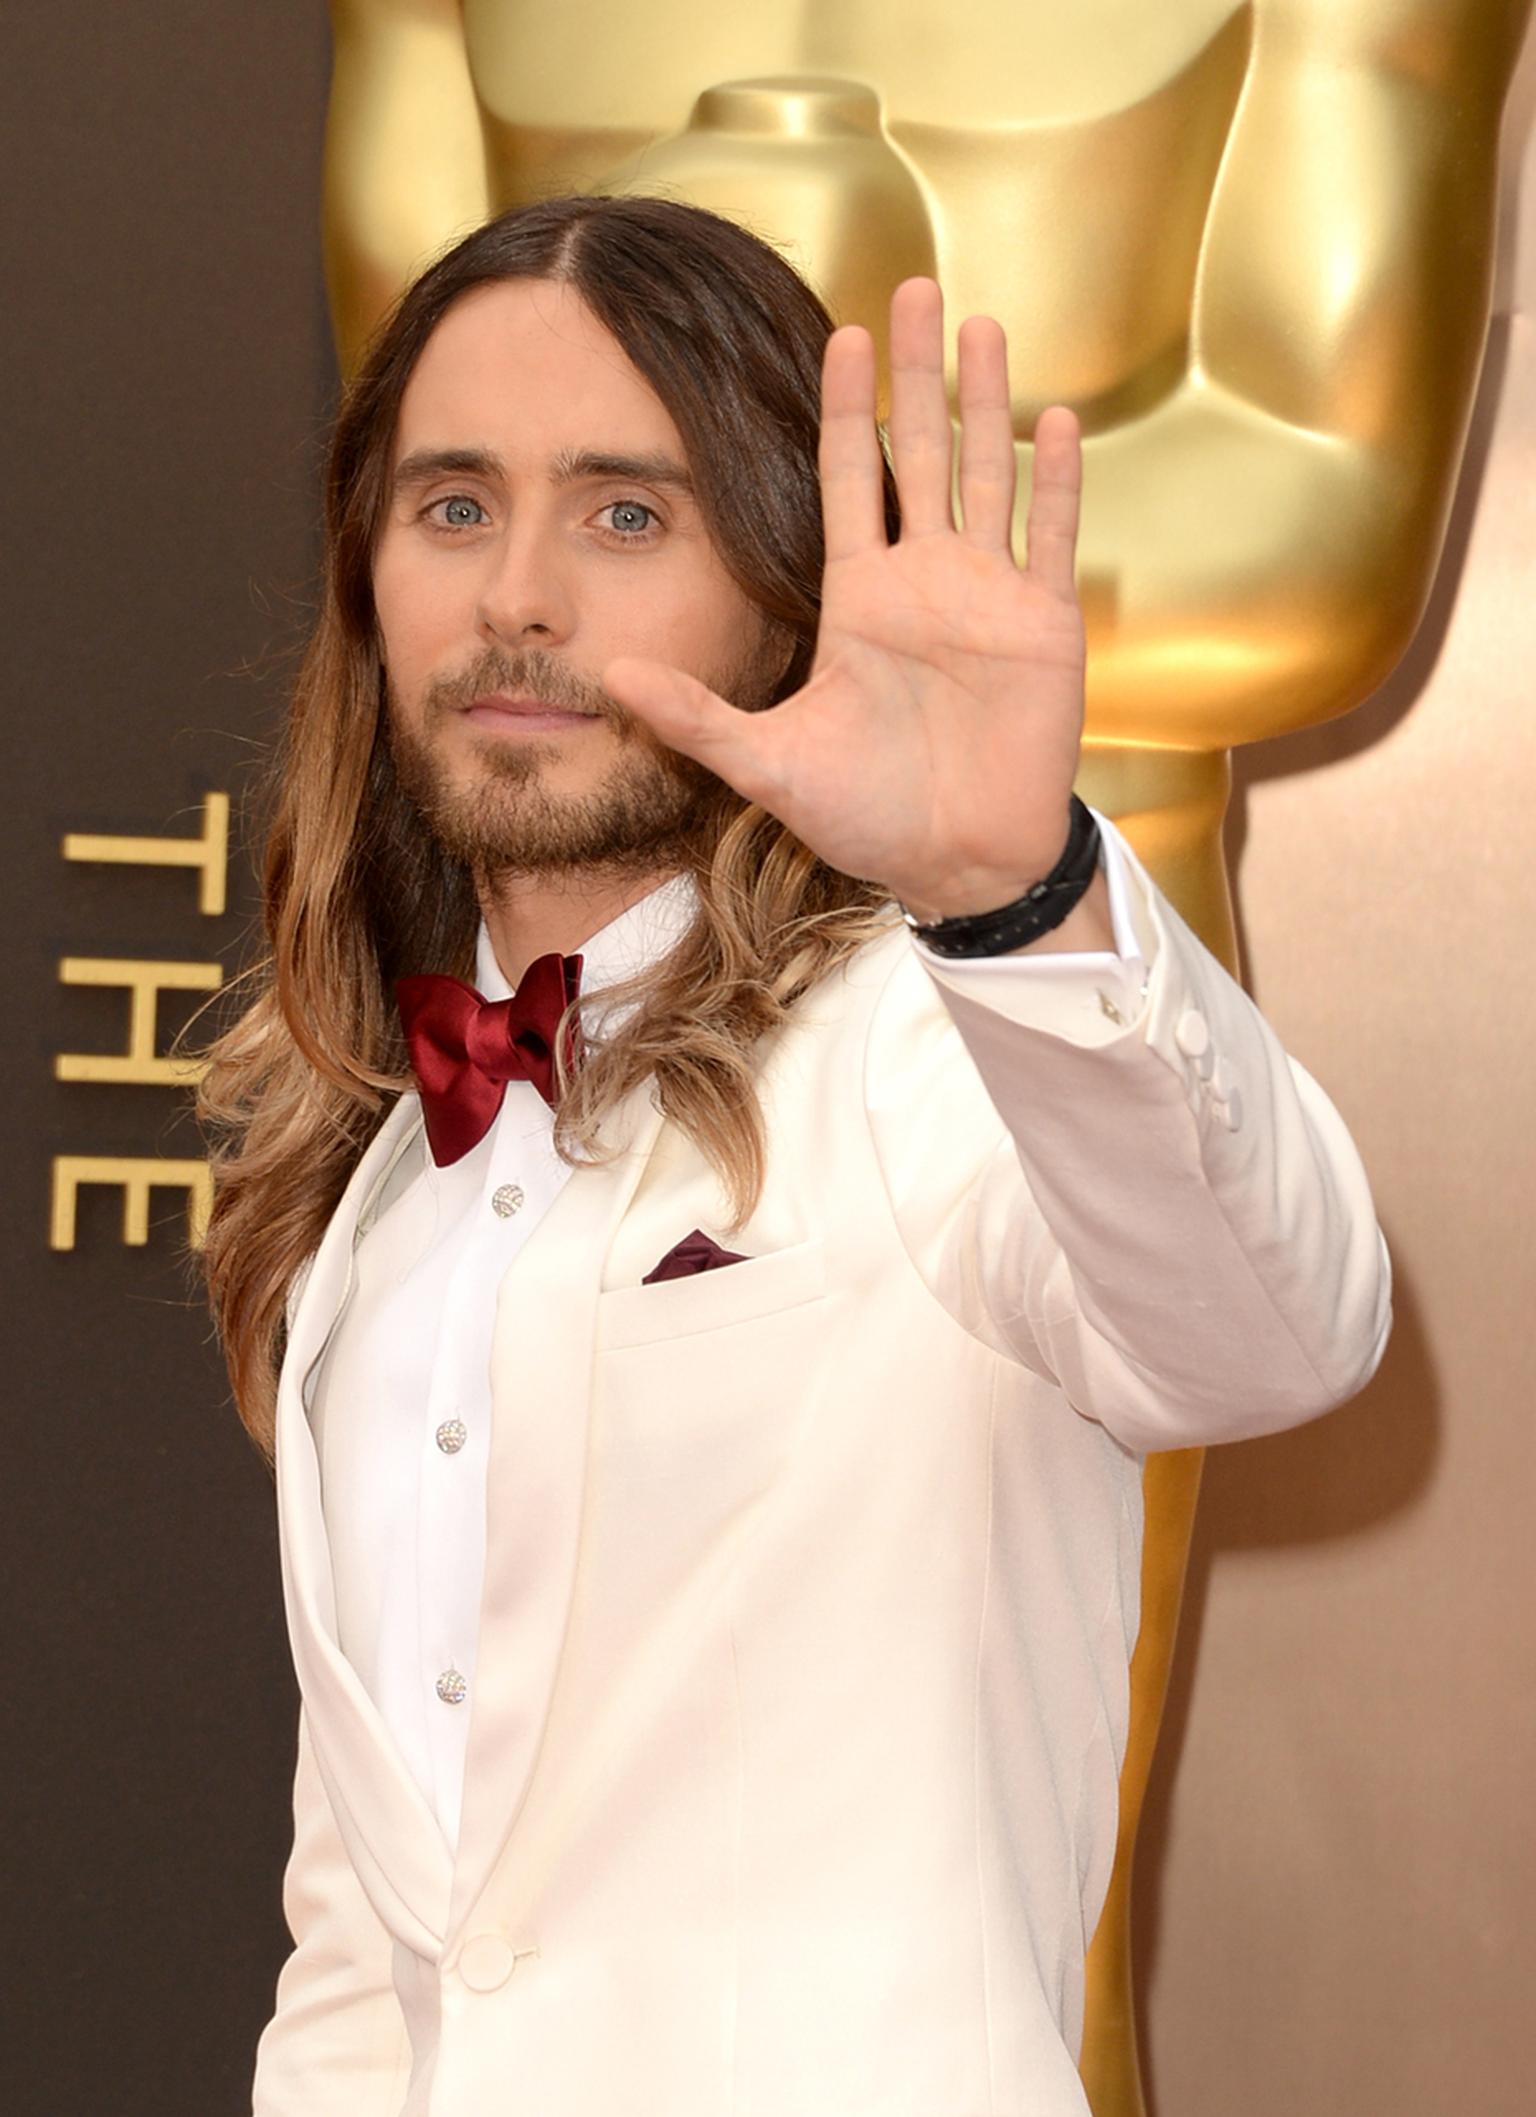 One of the best-dressed men on the night, Academy Award winner Jared Leto went for some subtle sparkle with a Neil Lane platinum and diamond dress set